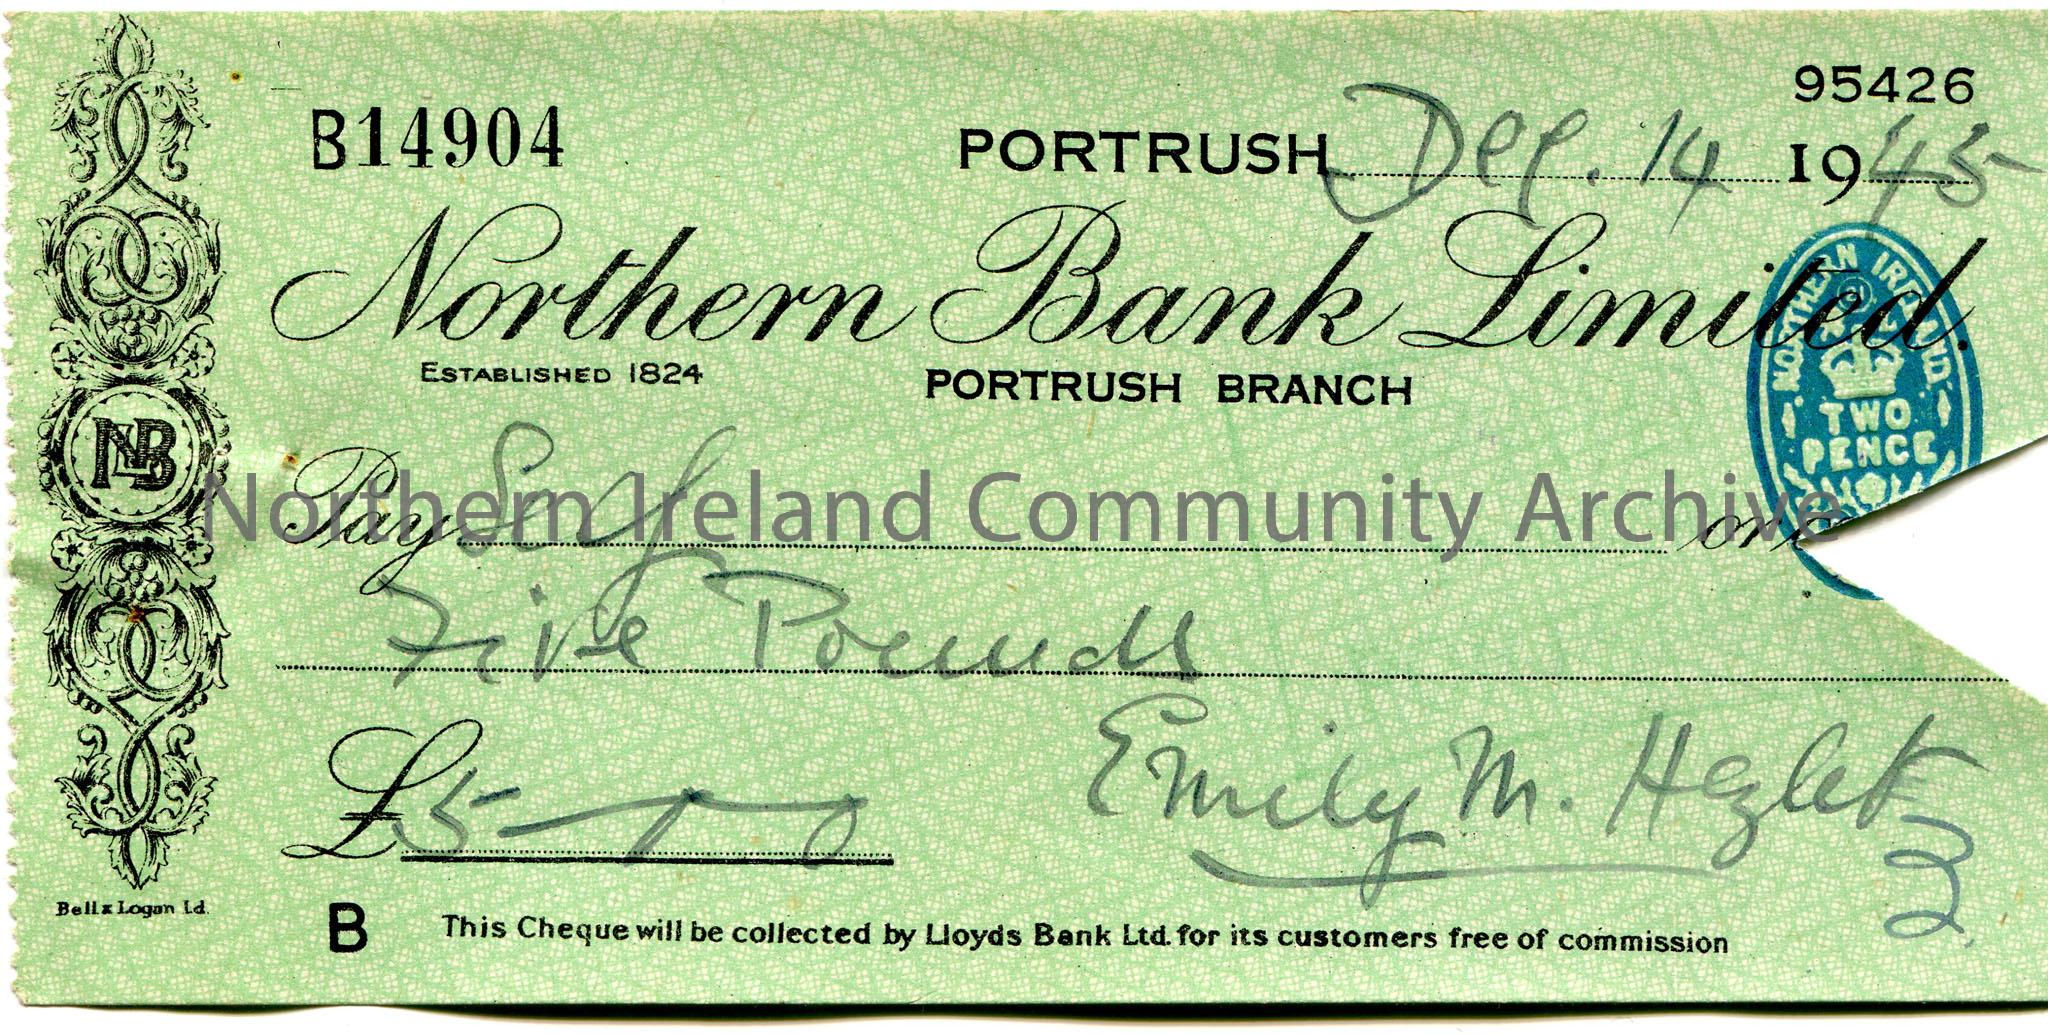 Handwritten Northern Bank Limited, Portrush branch cheque, no B14904. Payable to ‘Self’ from Emily M. Hezlet for £5.0.0. Dated 14th December, 194…